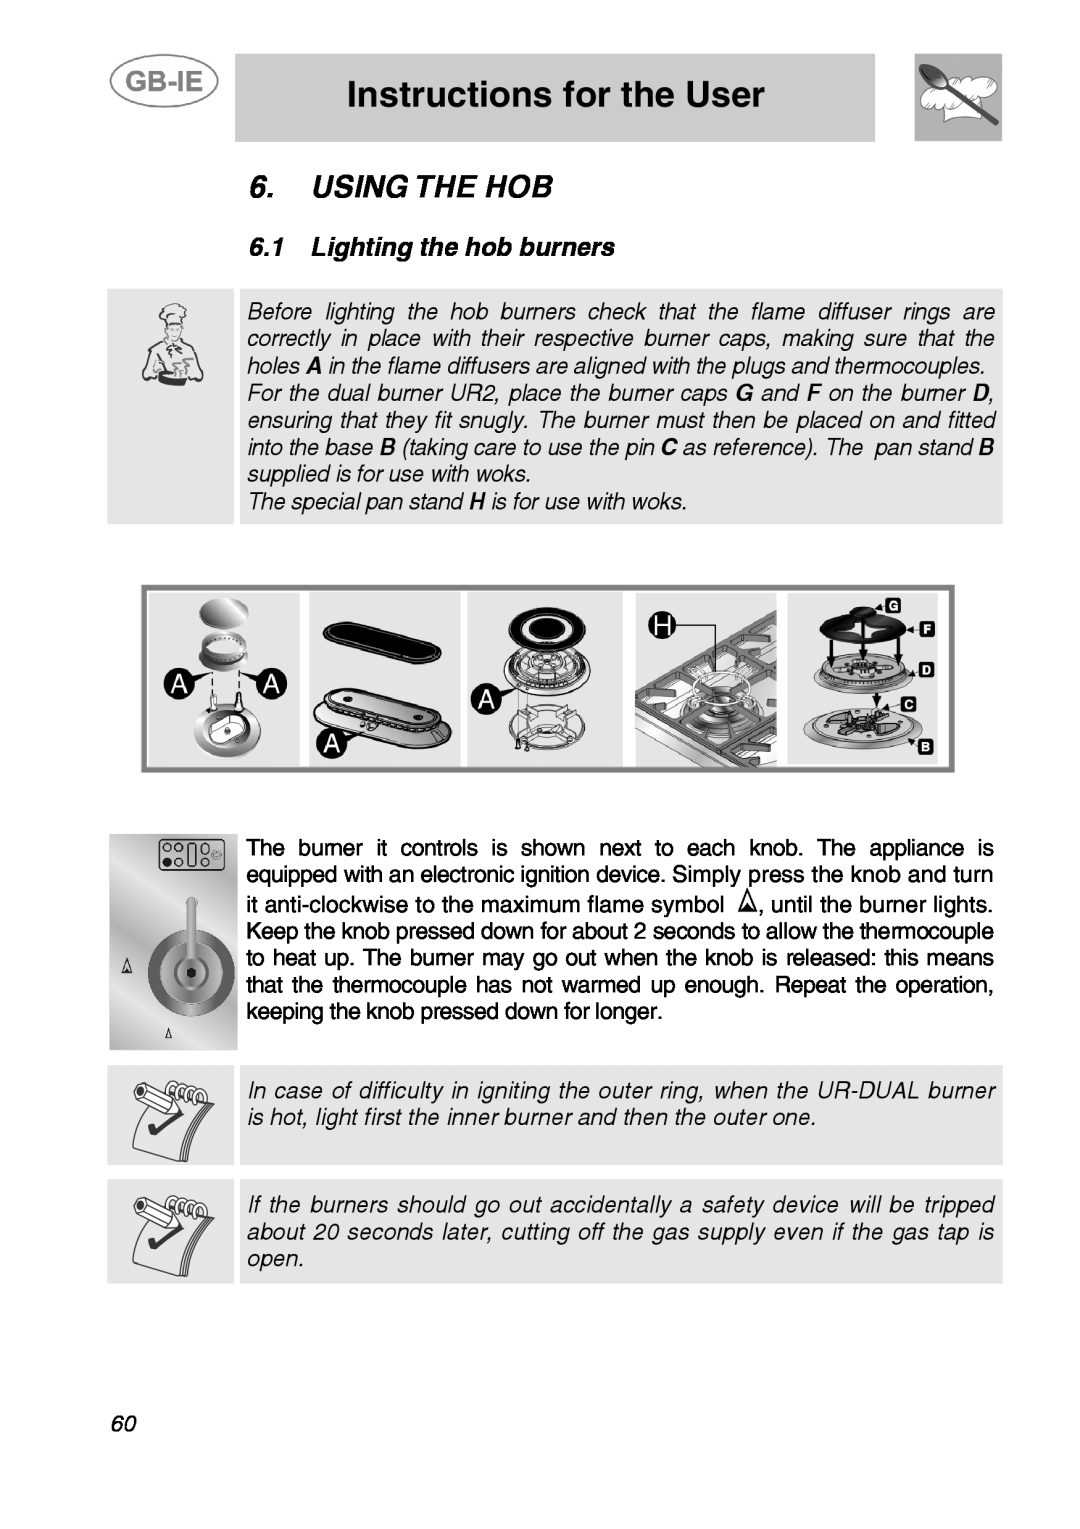 Smeg A5-6 manual Using The Hob, Lighting the hob burners, Instructions for the User 